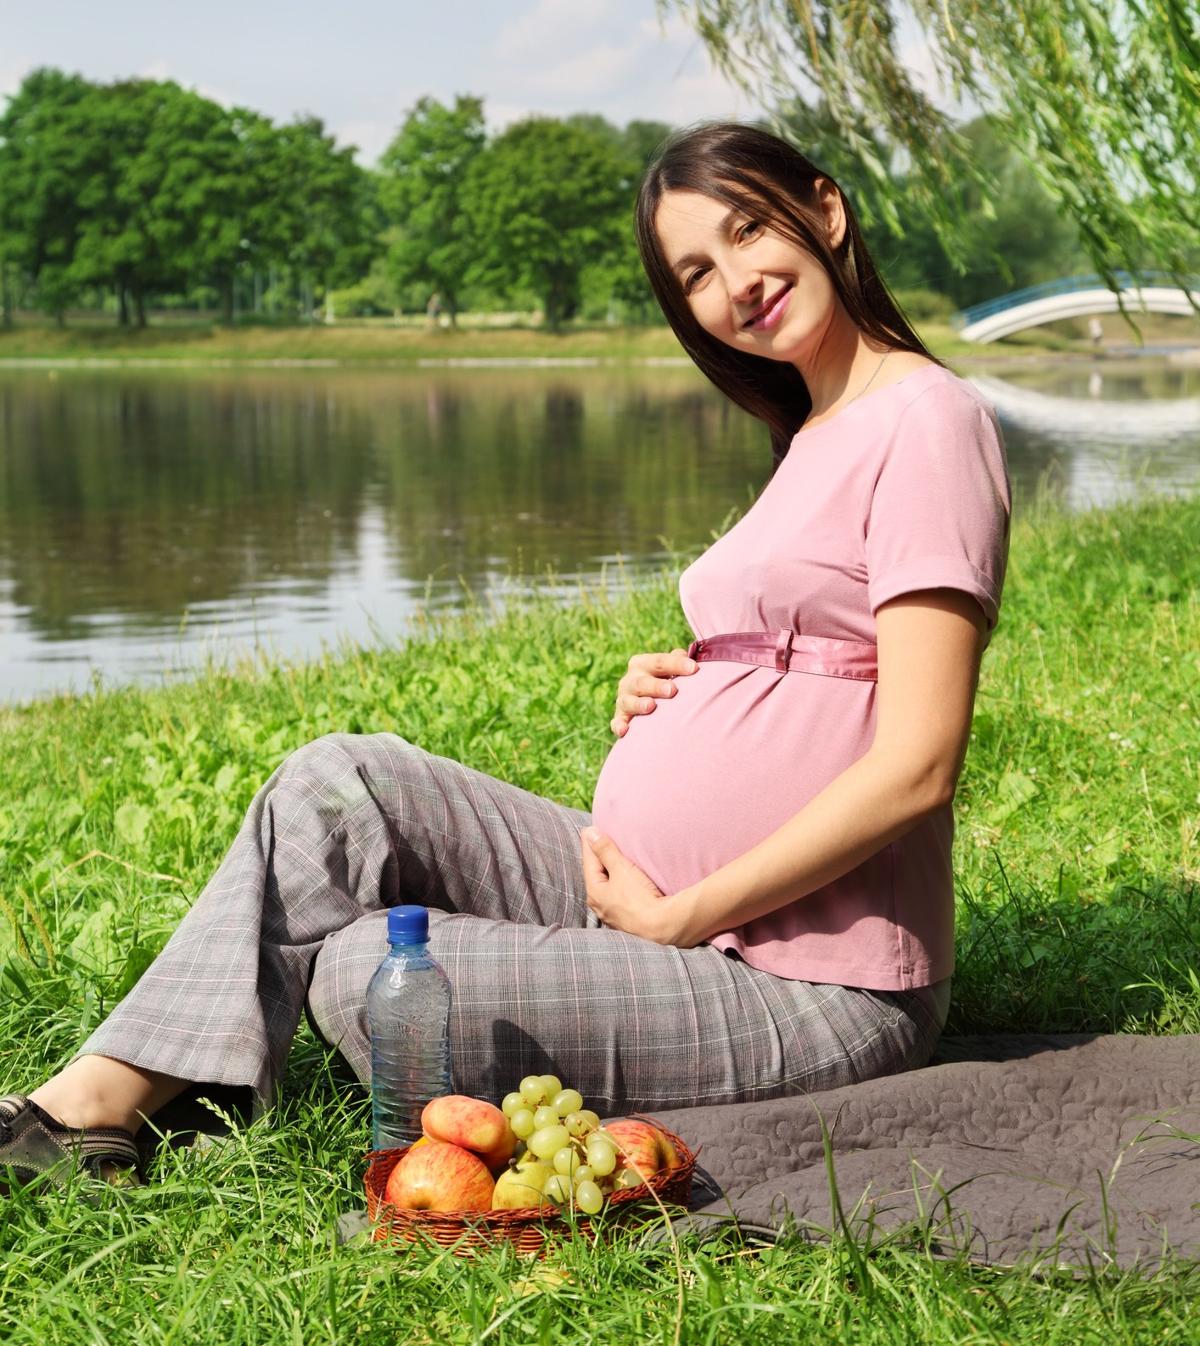 Glucose Levels During Pregnancy